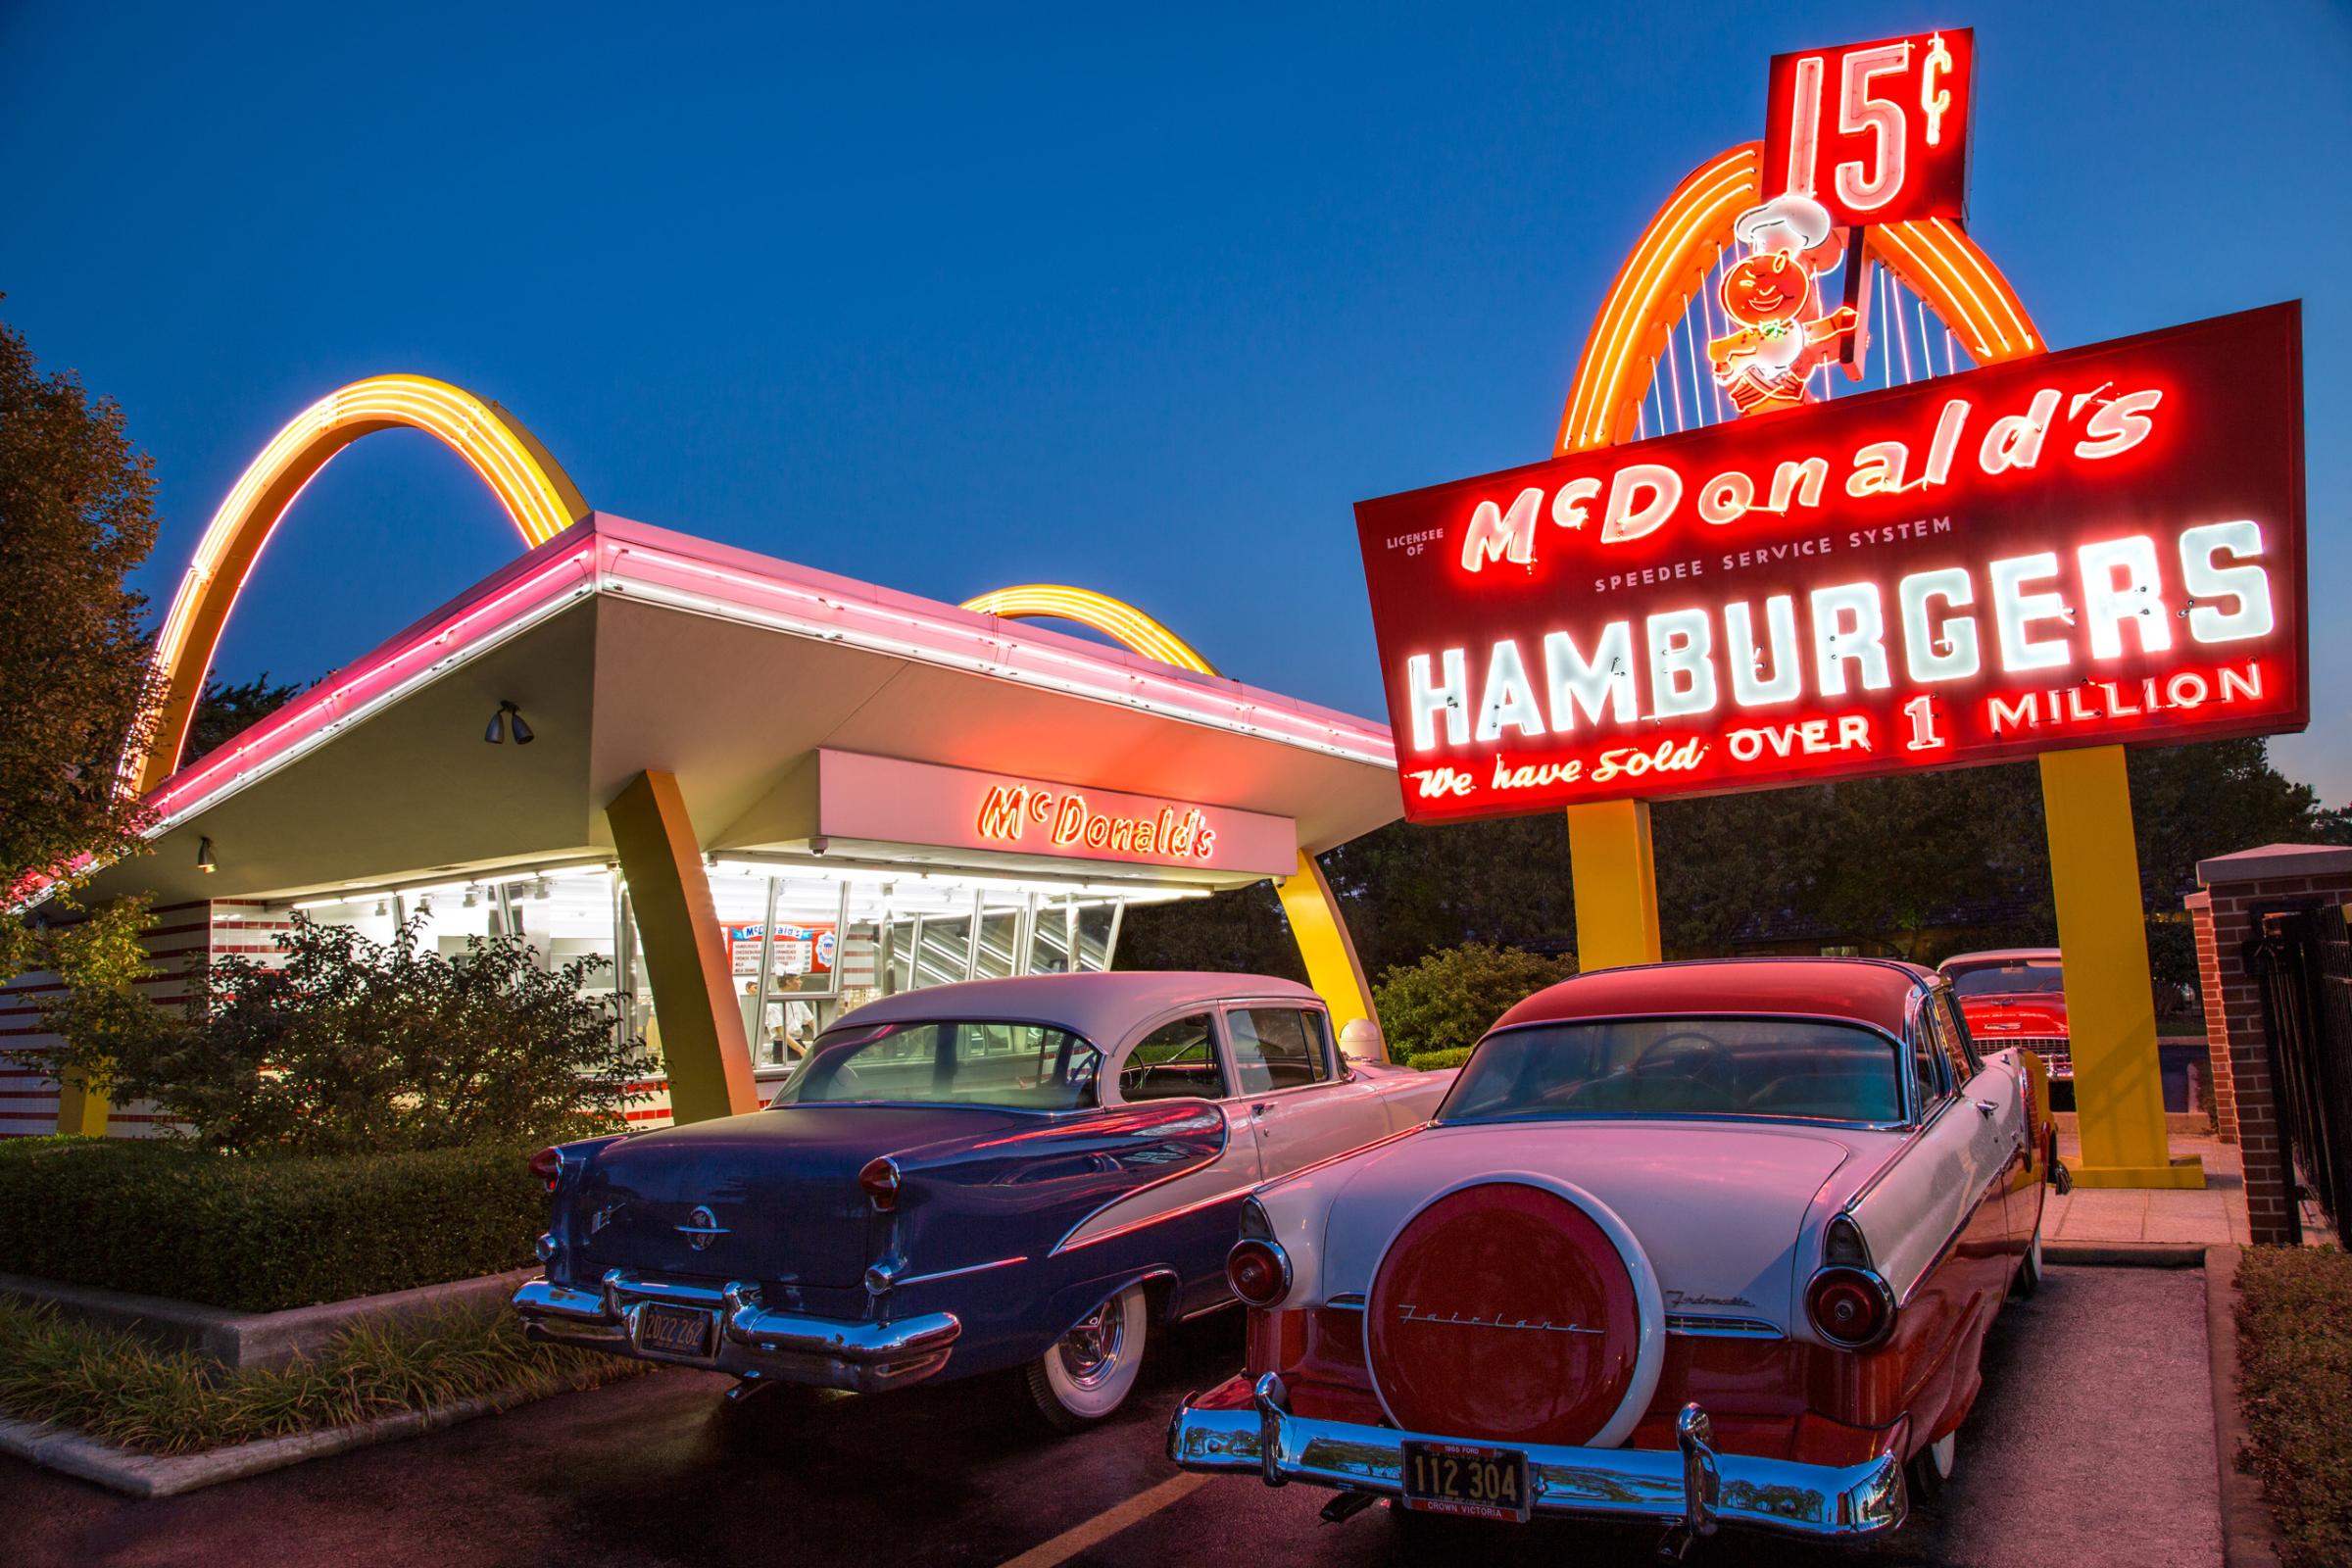 Ray Kroc's First McDonald's Restaurant in Des Plaines, Illinois is restored to its original form and reopens on May 21, 1985 as the McDonald's #1 Restaurant Museum.